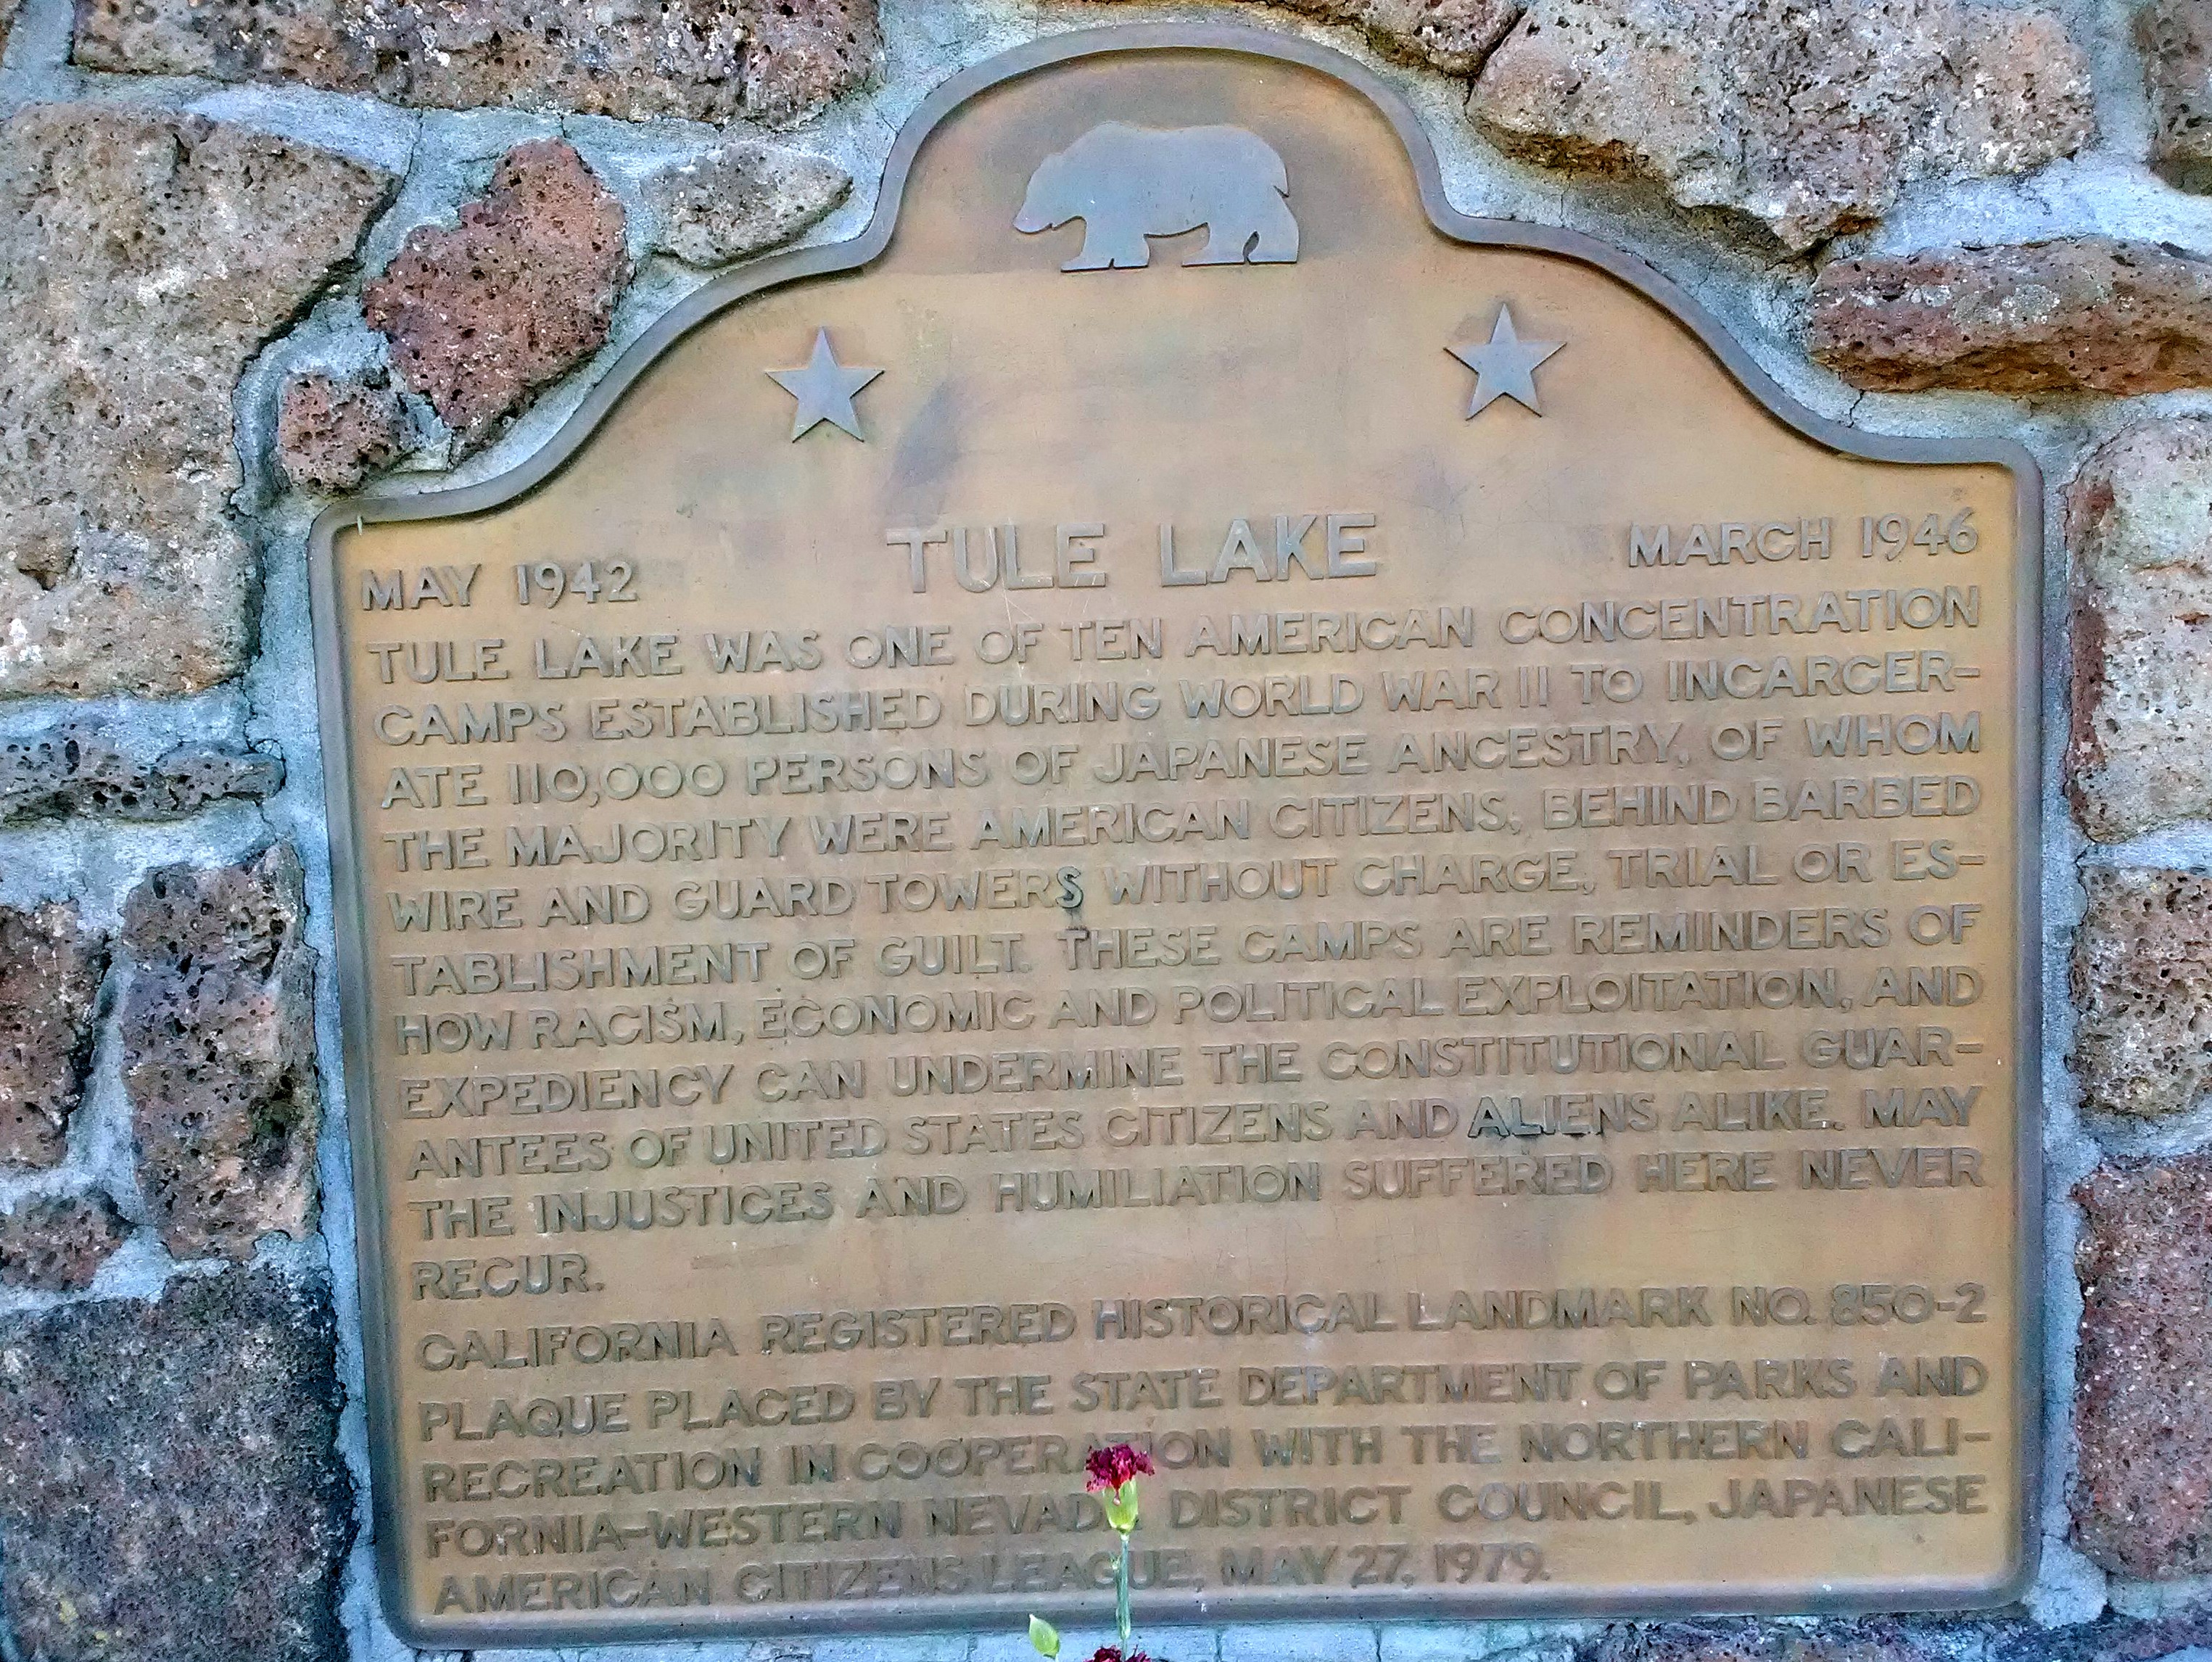 Tule Lake Concentration Camp